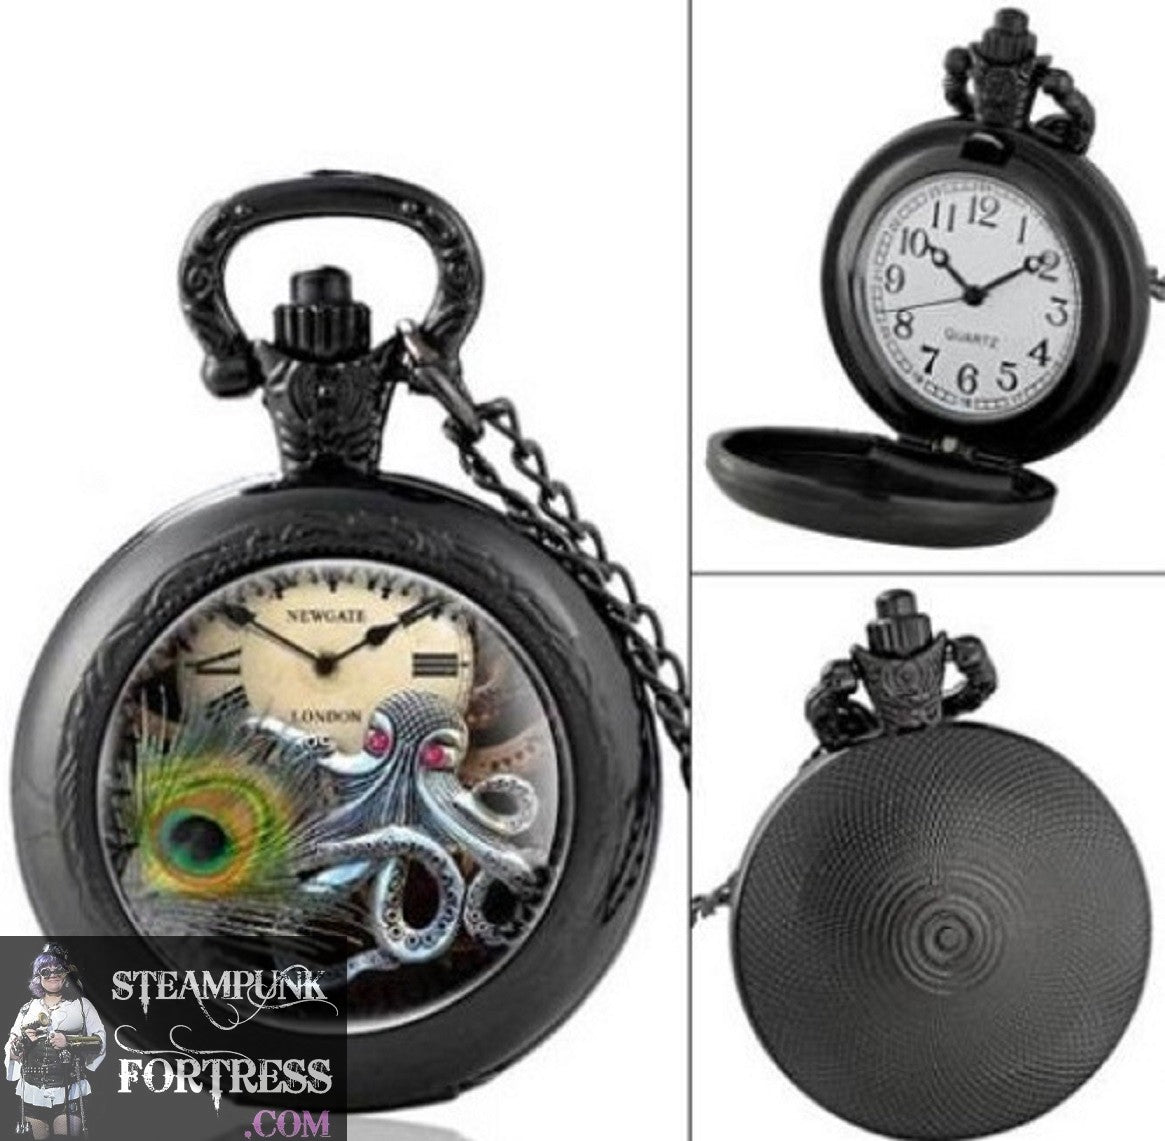 GUNMETAL BLACK PEACOCK FEATHER OCTOPUS CLOCK WATCH FACE DIAL SMALL WORKING POCKETWATCH POCKET WATCH WITH CHAIN AND CLASP - MASS PRODUCED